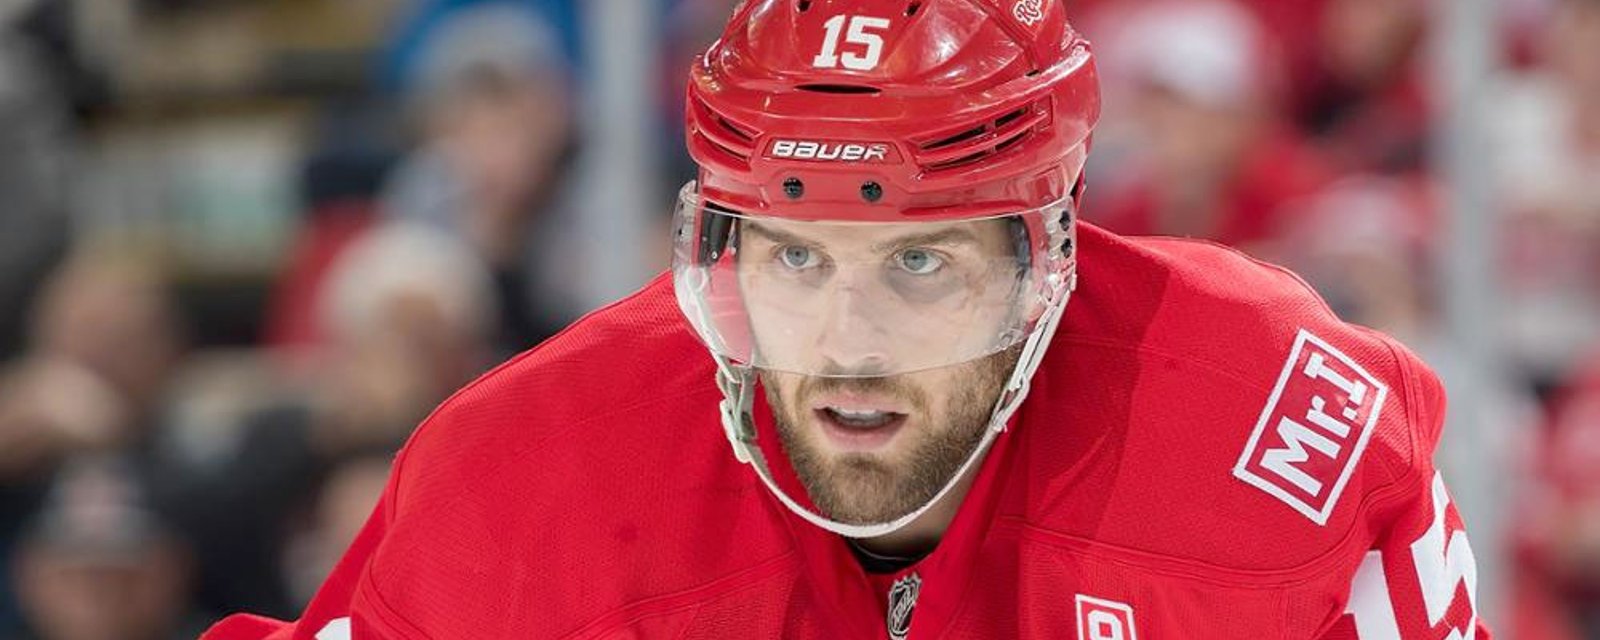 Riley Sheahan signs one year deal with Canadian team